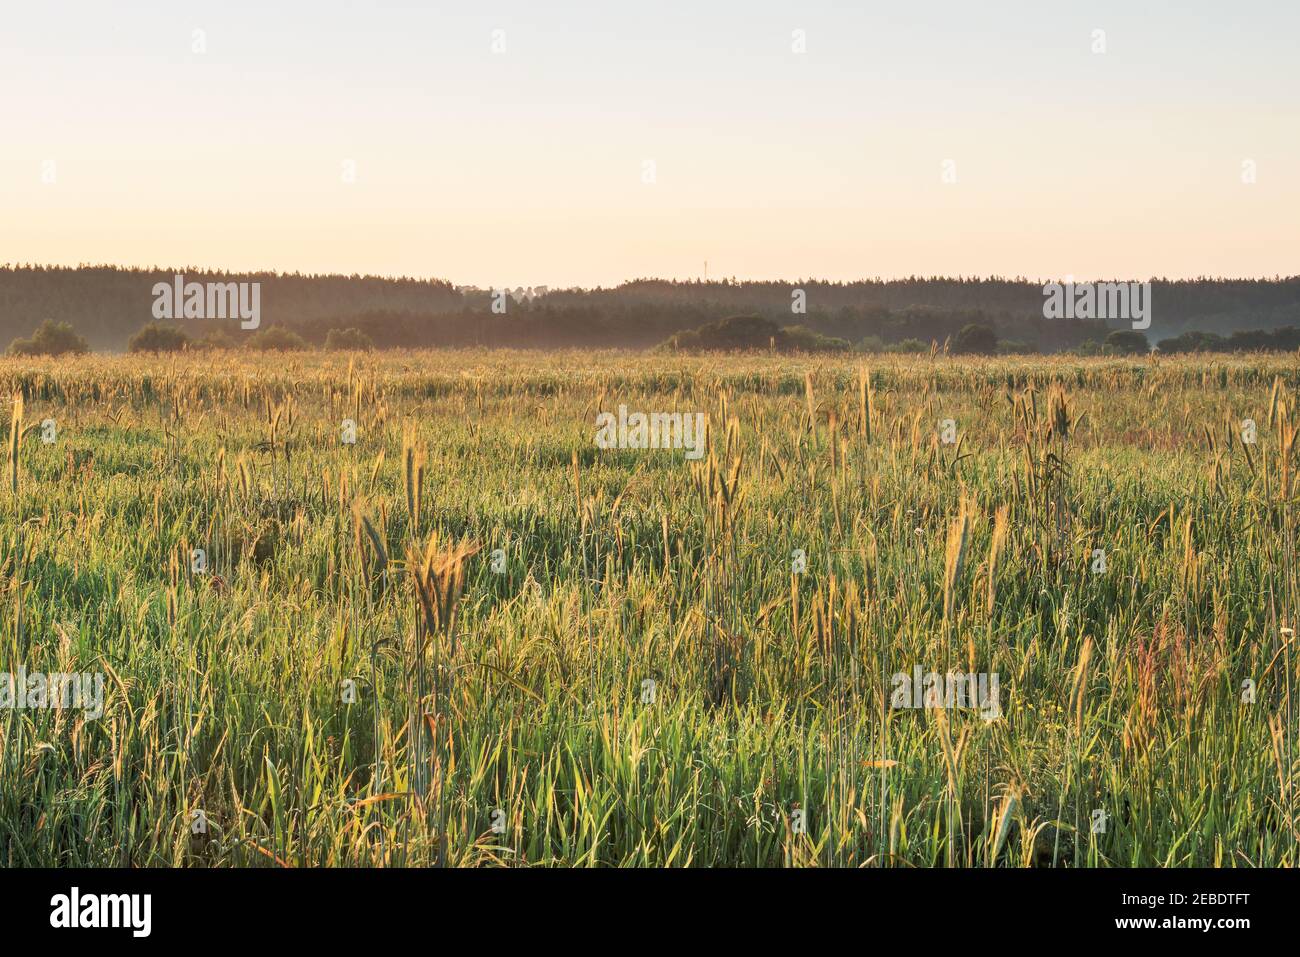 Dawn in a field with tall grass, spikelets of wheat and flowers. Stock Photo